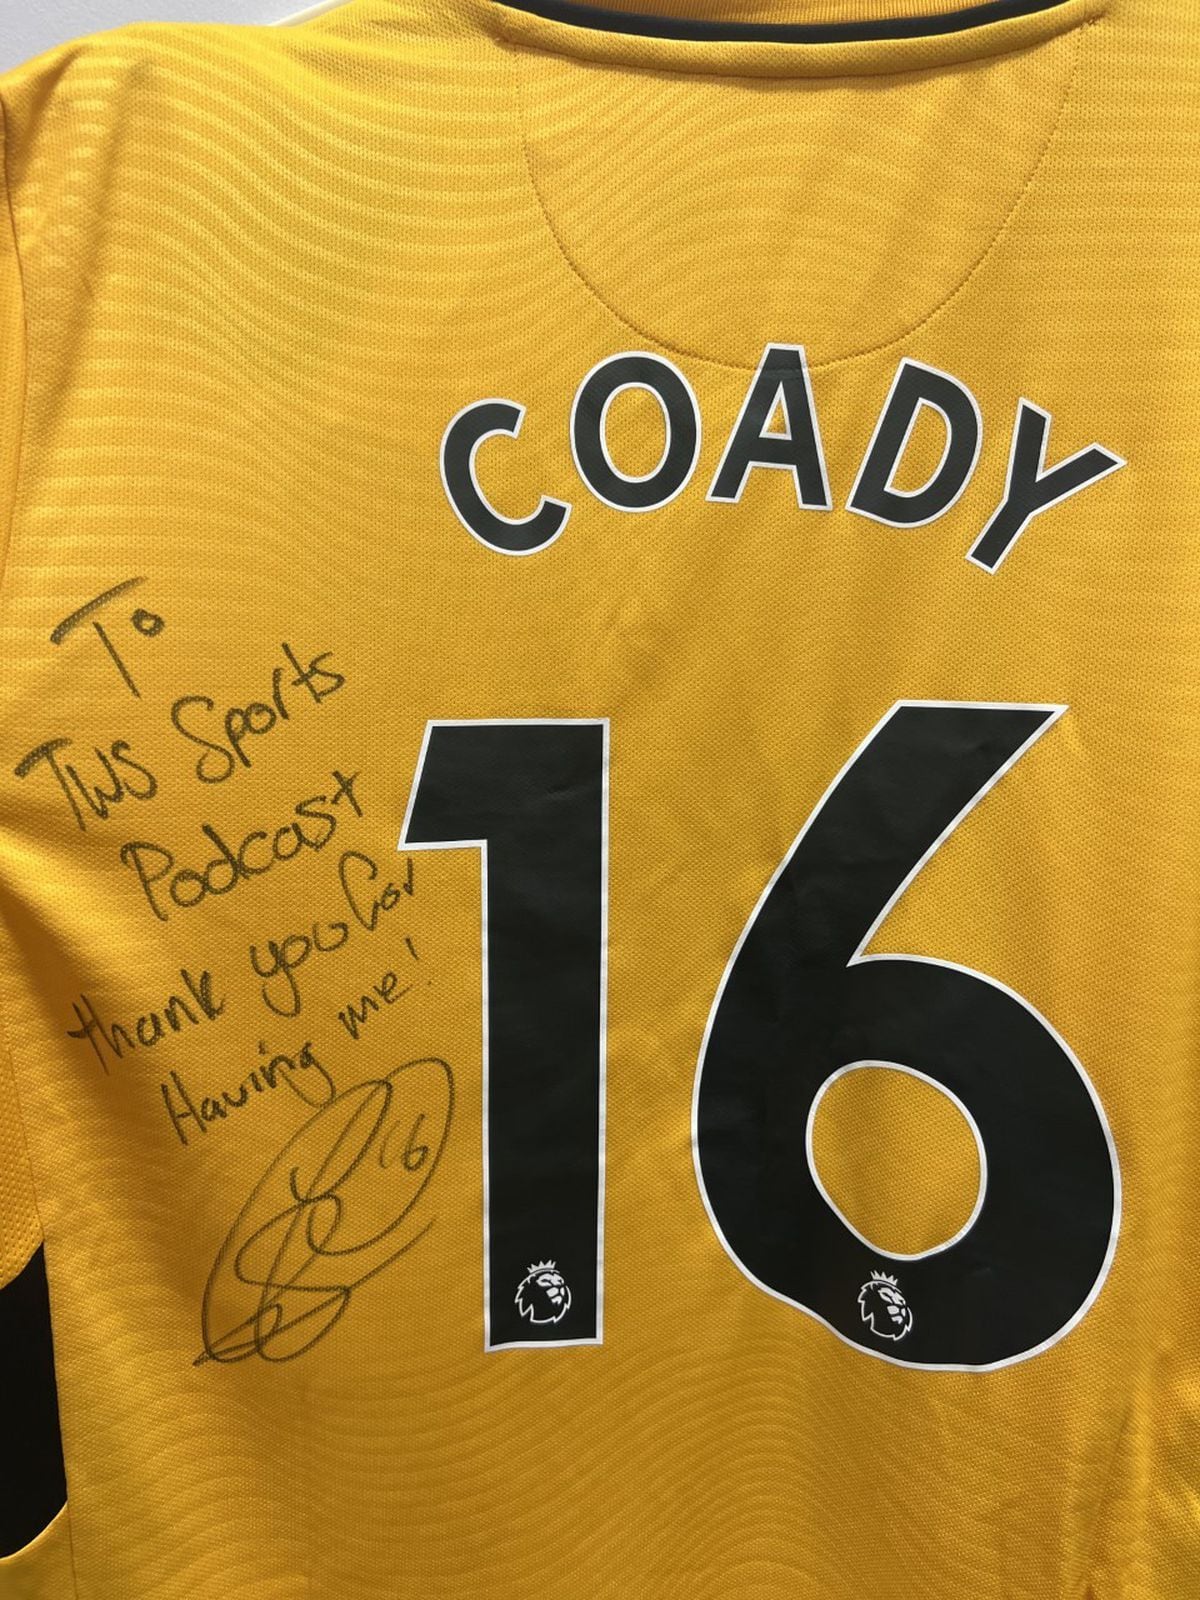 Conor Coady signed a shirt for the podcast team